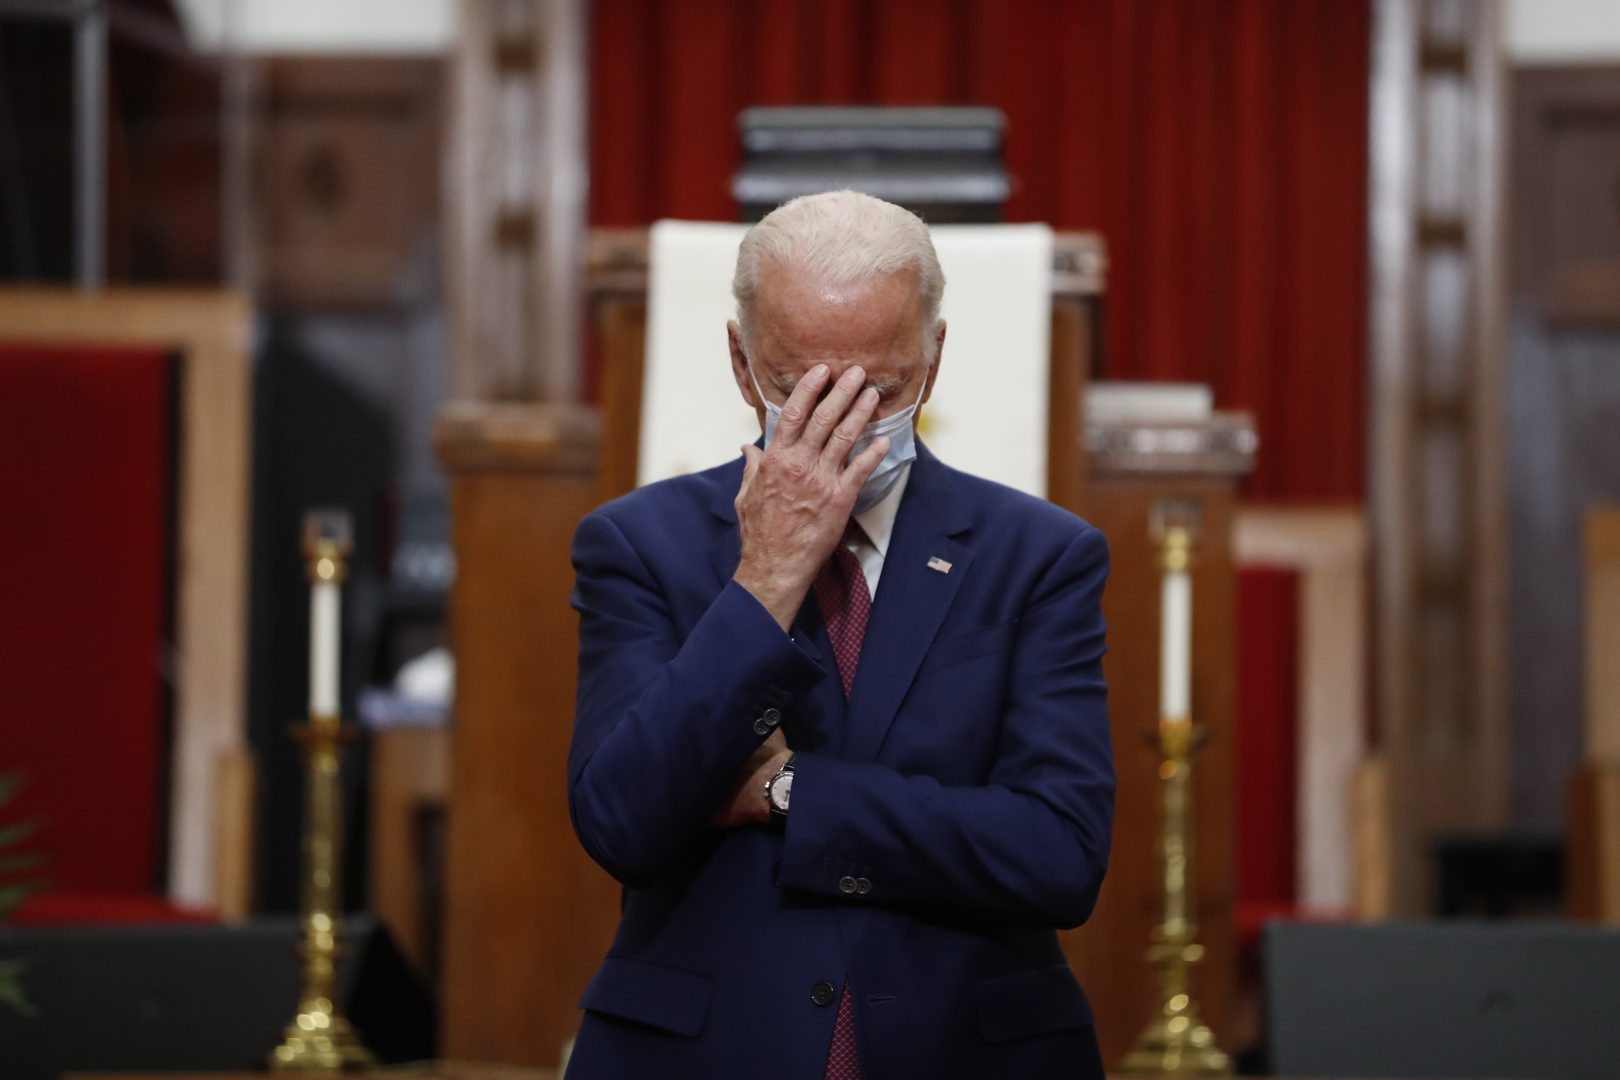 Democratic presidential candidate, former Vice President Joe Biden touches his face as he speaks to members of the clergy and community leaders at Bethel AME Church in Wilmington, Del., Monday, June 1, 2020. (